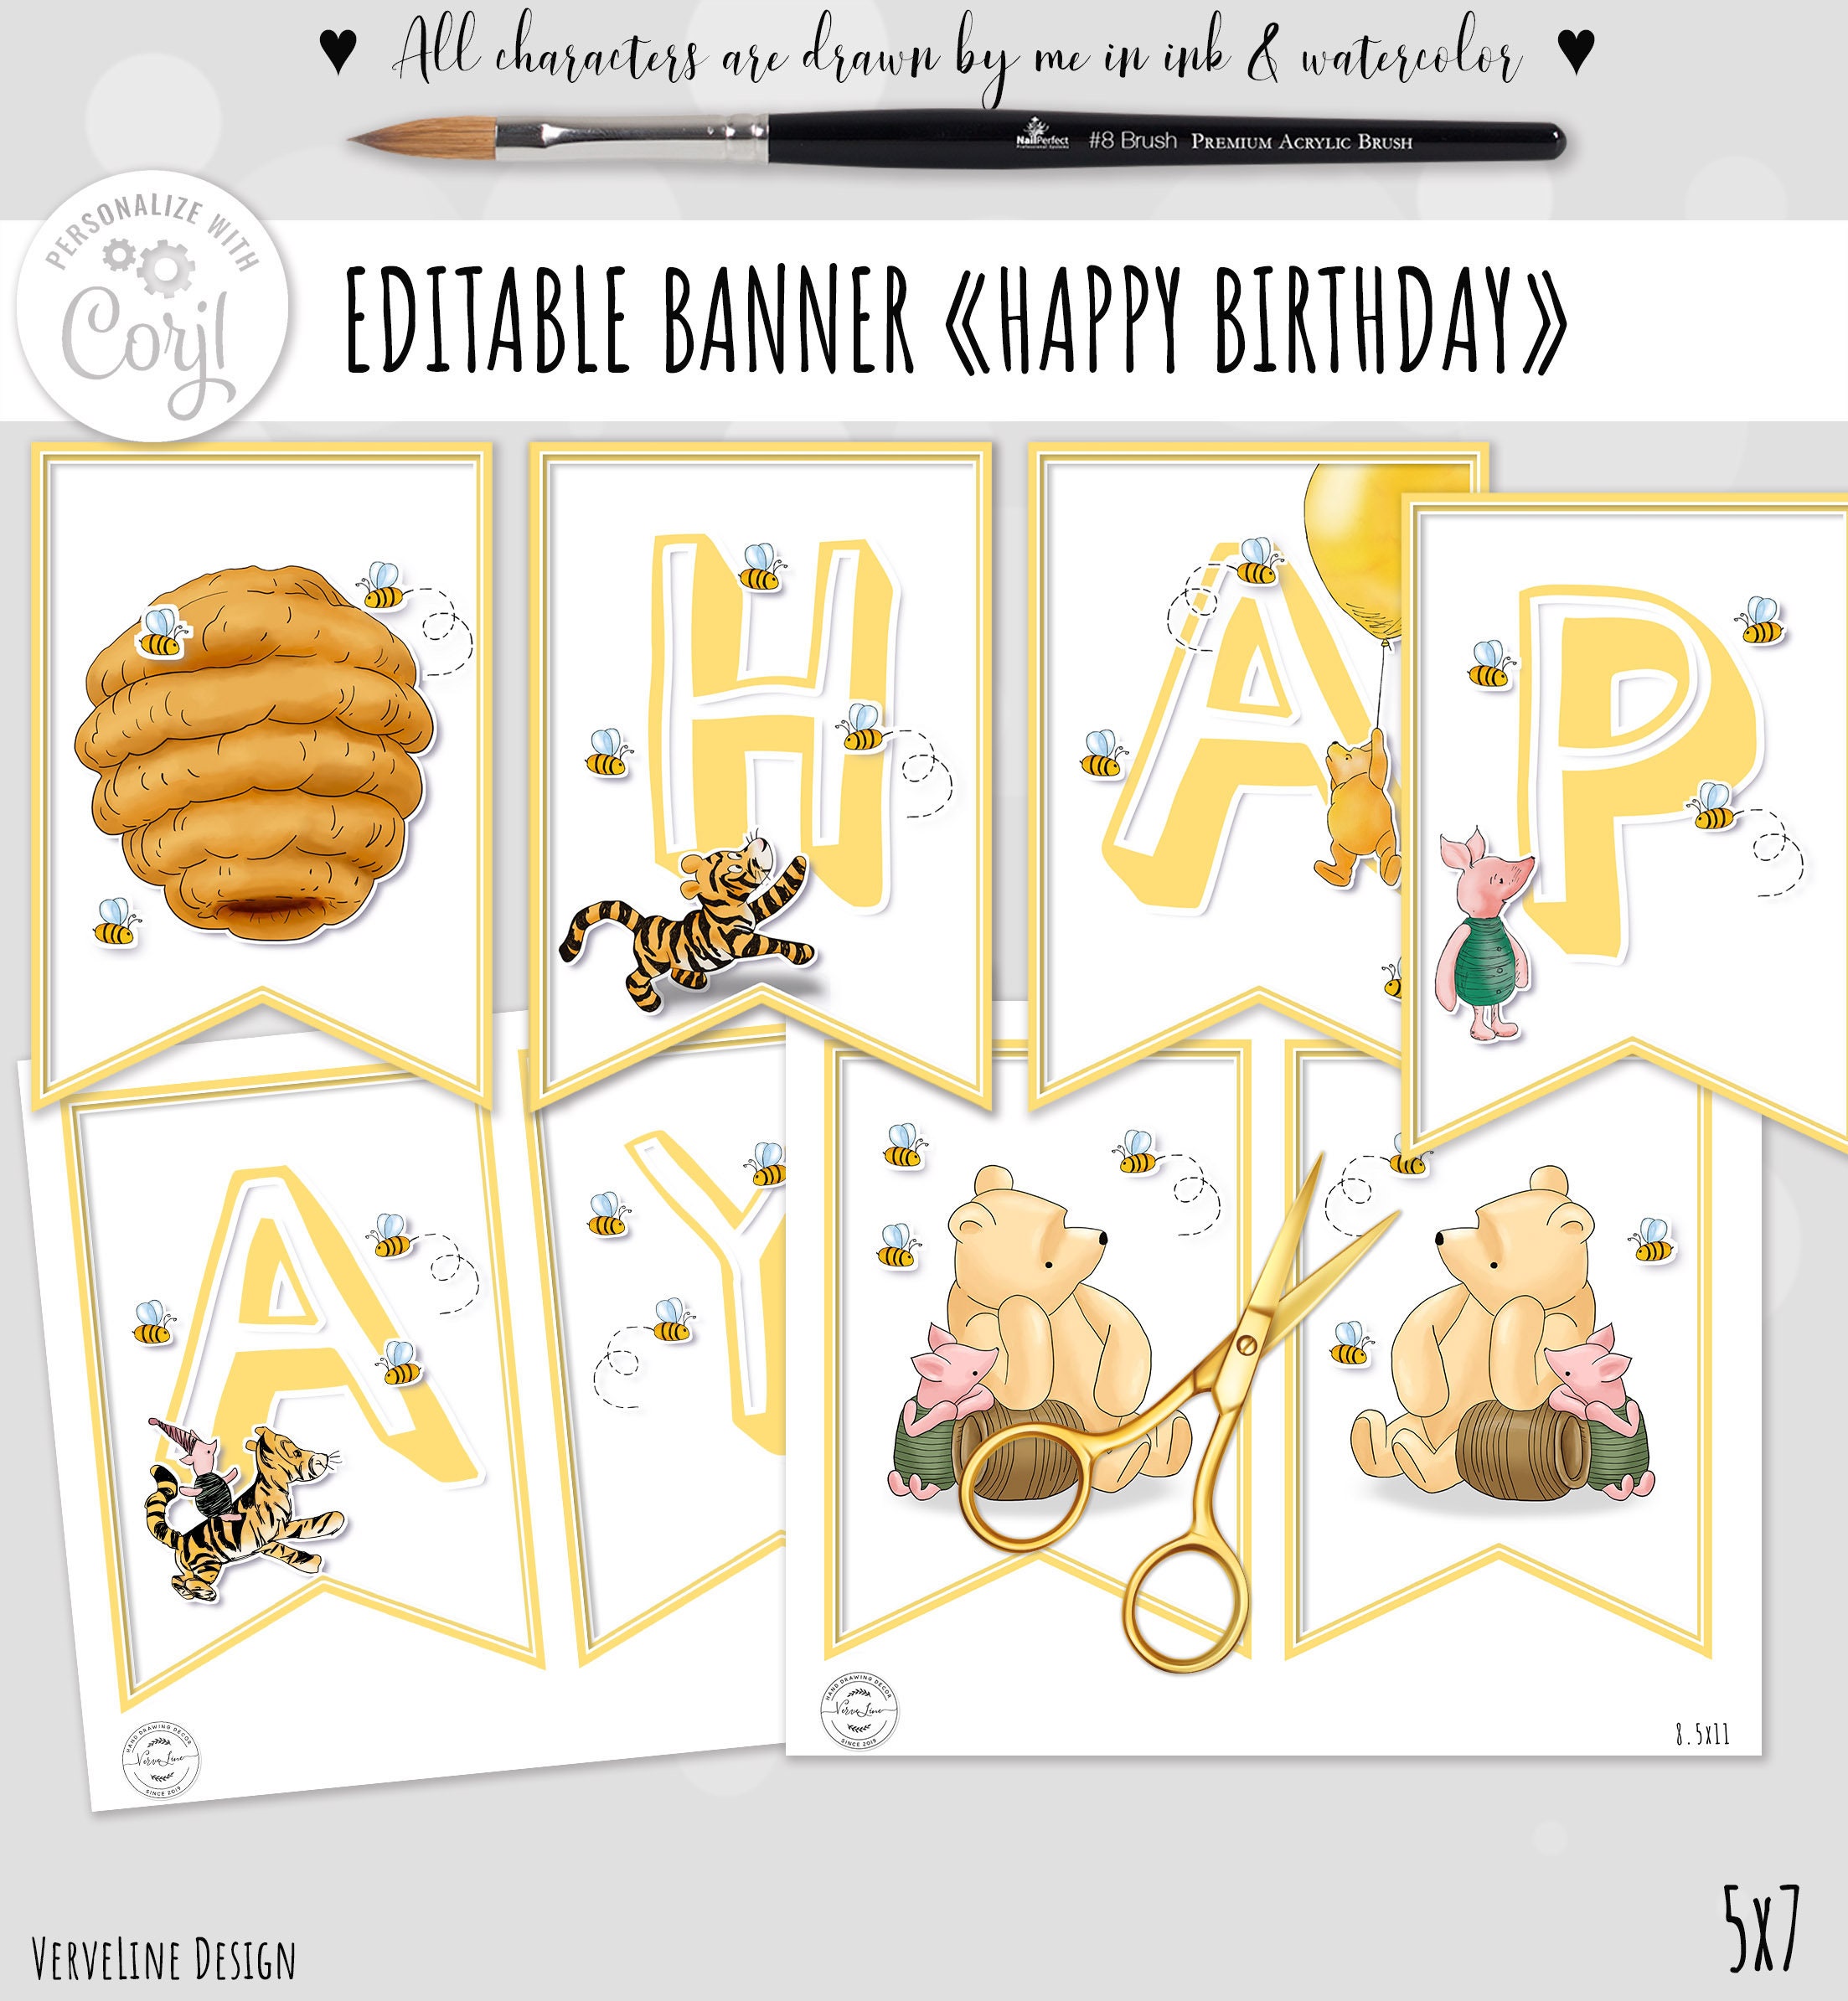 Cake Topper Classic Winnie the Pooh Baby Shower Oh Baby 5x7 Gold Glitter  effect design DIGITAL Download 0001